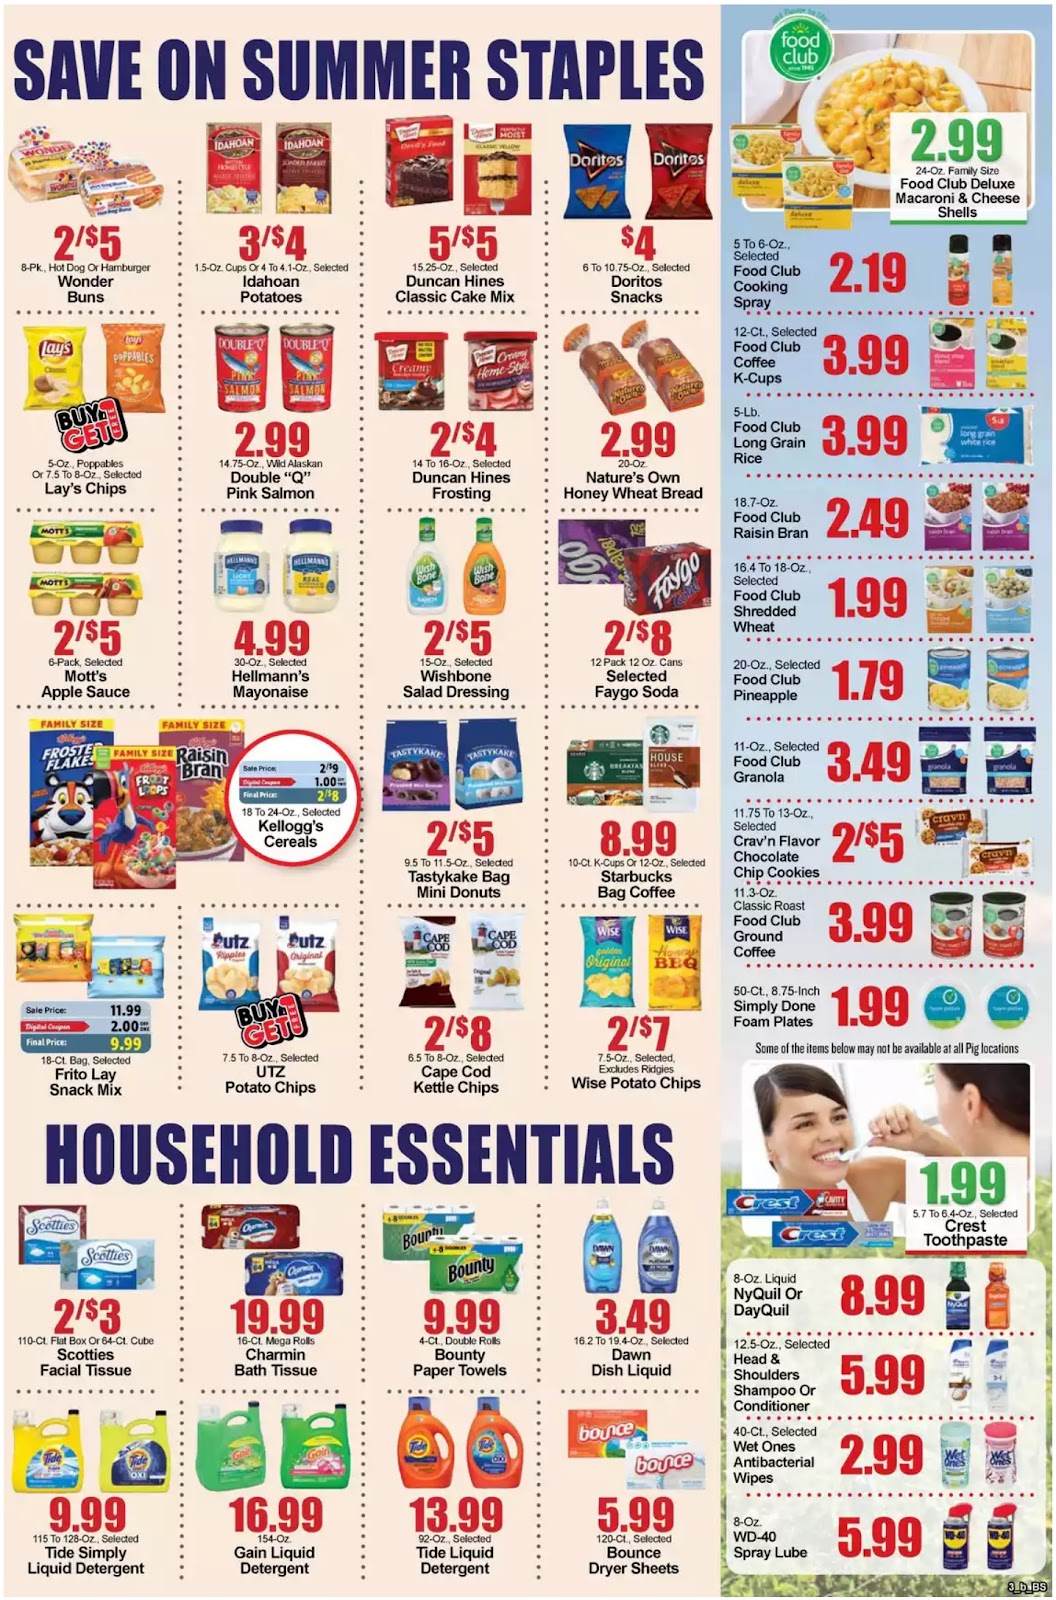 Piggly Wiggly Weekly Ad - 3